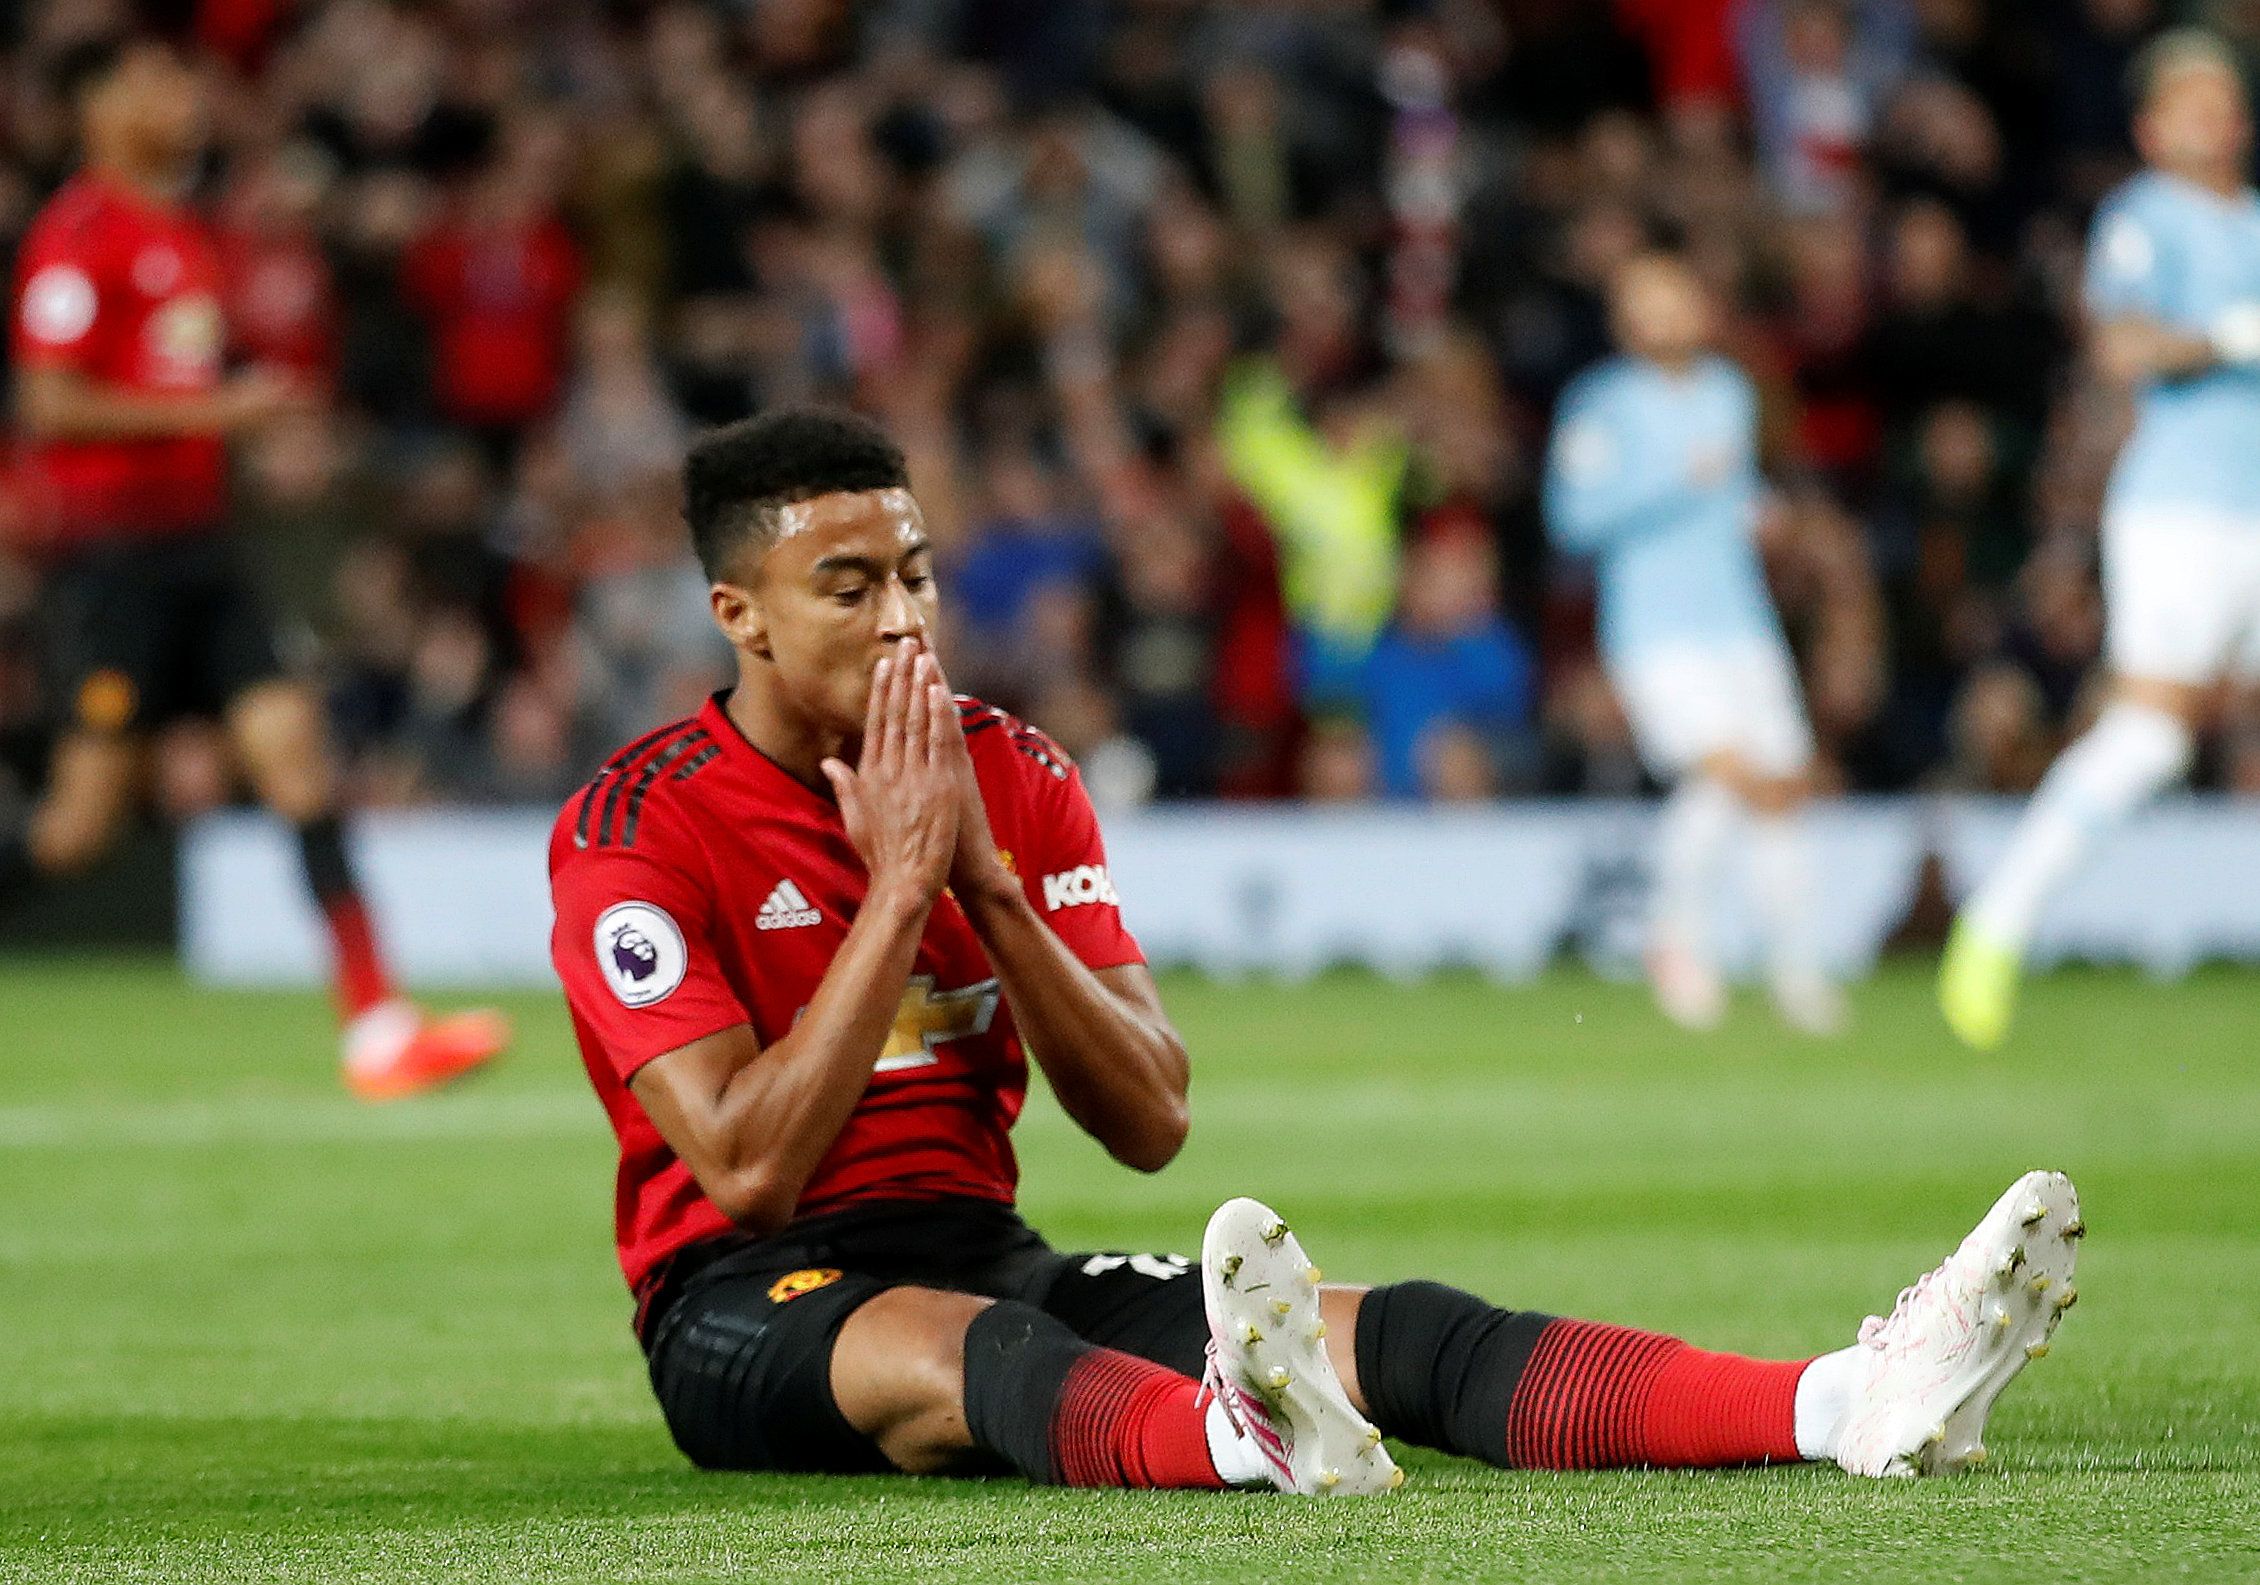 Manchester United attacker Jesse Lingard reacts after missed opportunity vs Manchester City